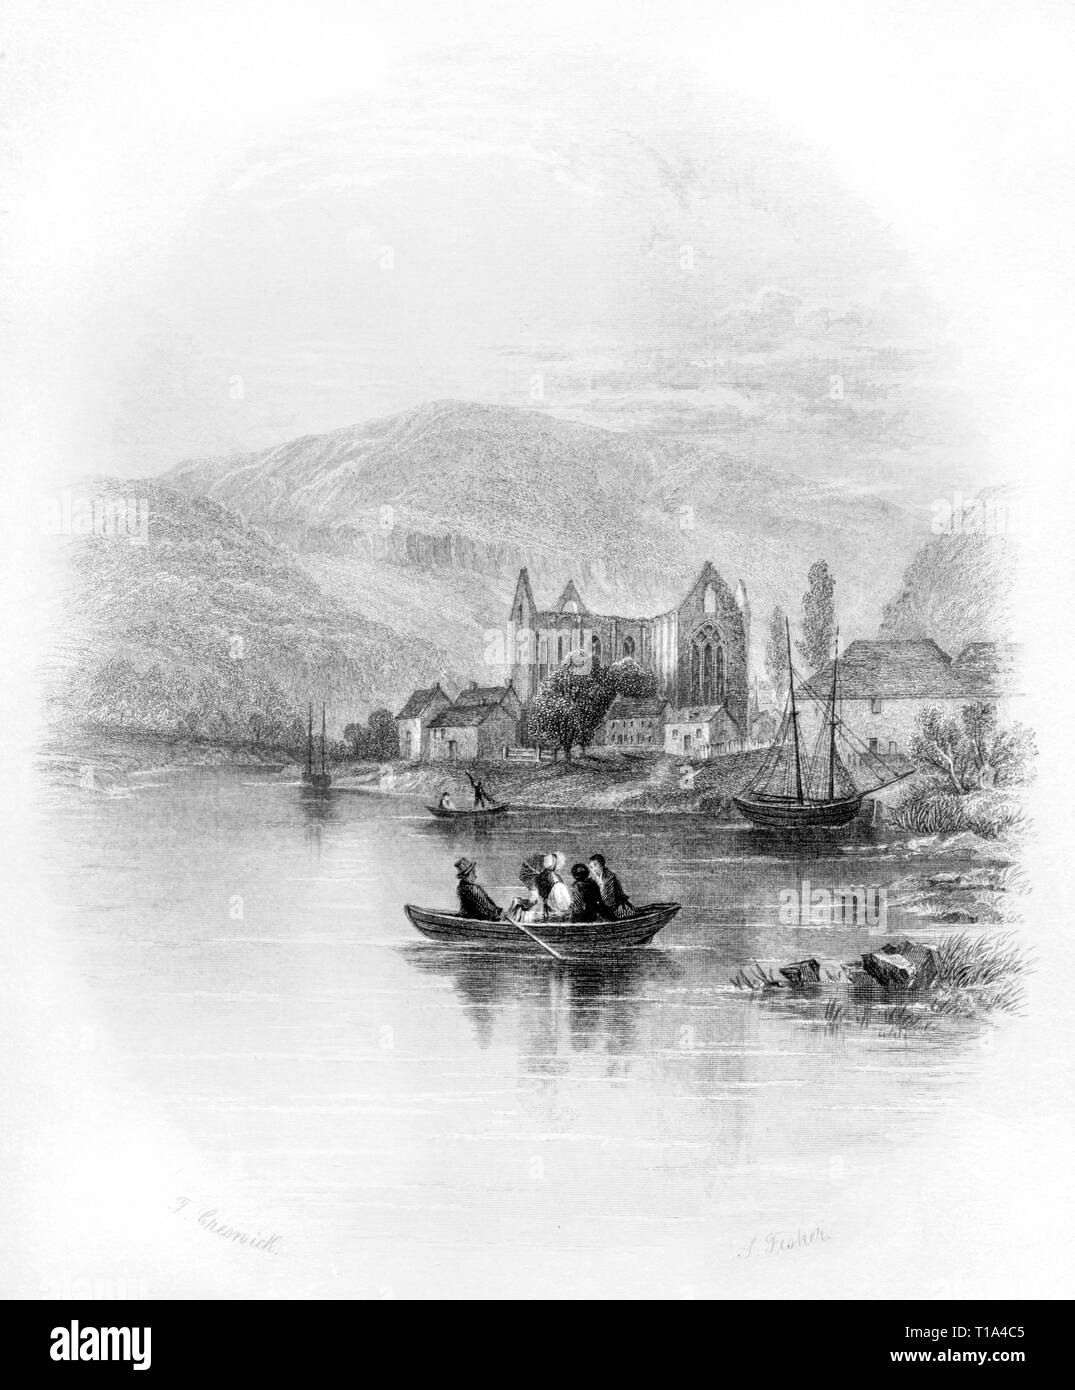 An engraving of Tintern Abbey on the banks of the River Wye, Monmouthshire, Wales UK scanned at high resolution from a book published in 1841. Stock Photo